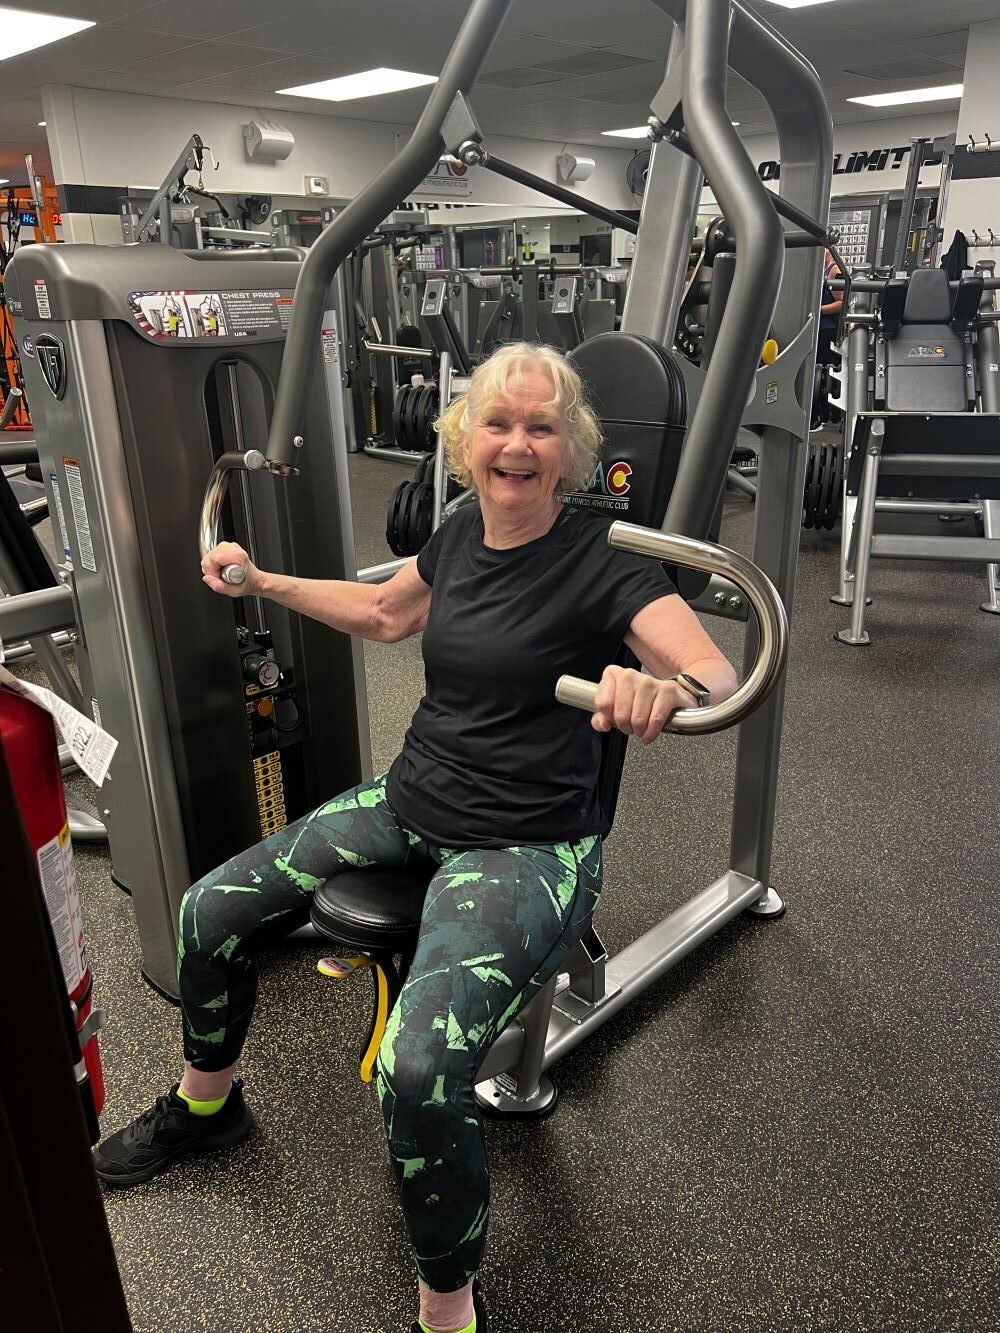 Older woman smiling while she works out at the chest press machine at AFAC gym